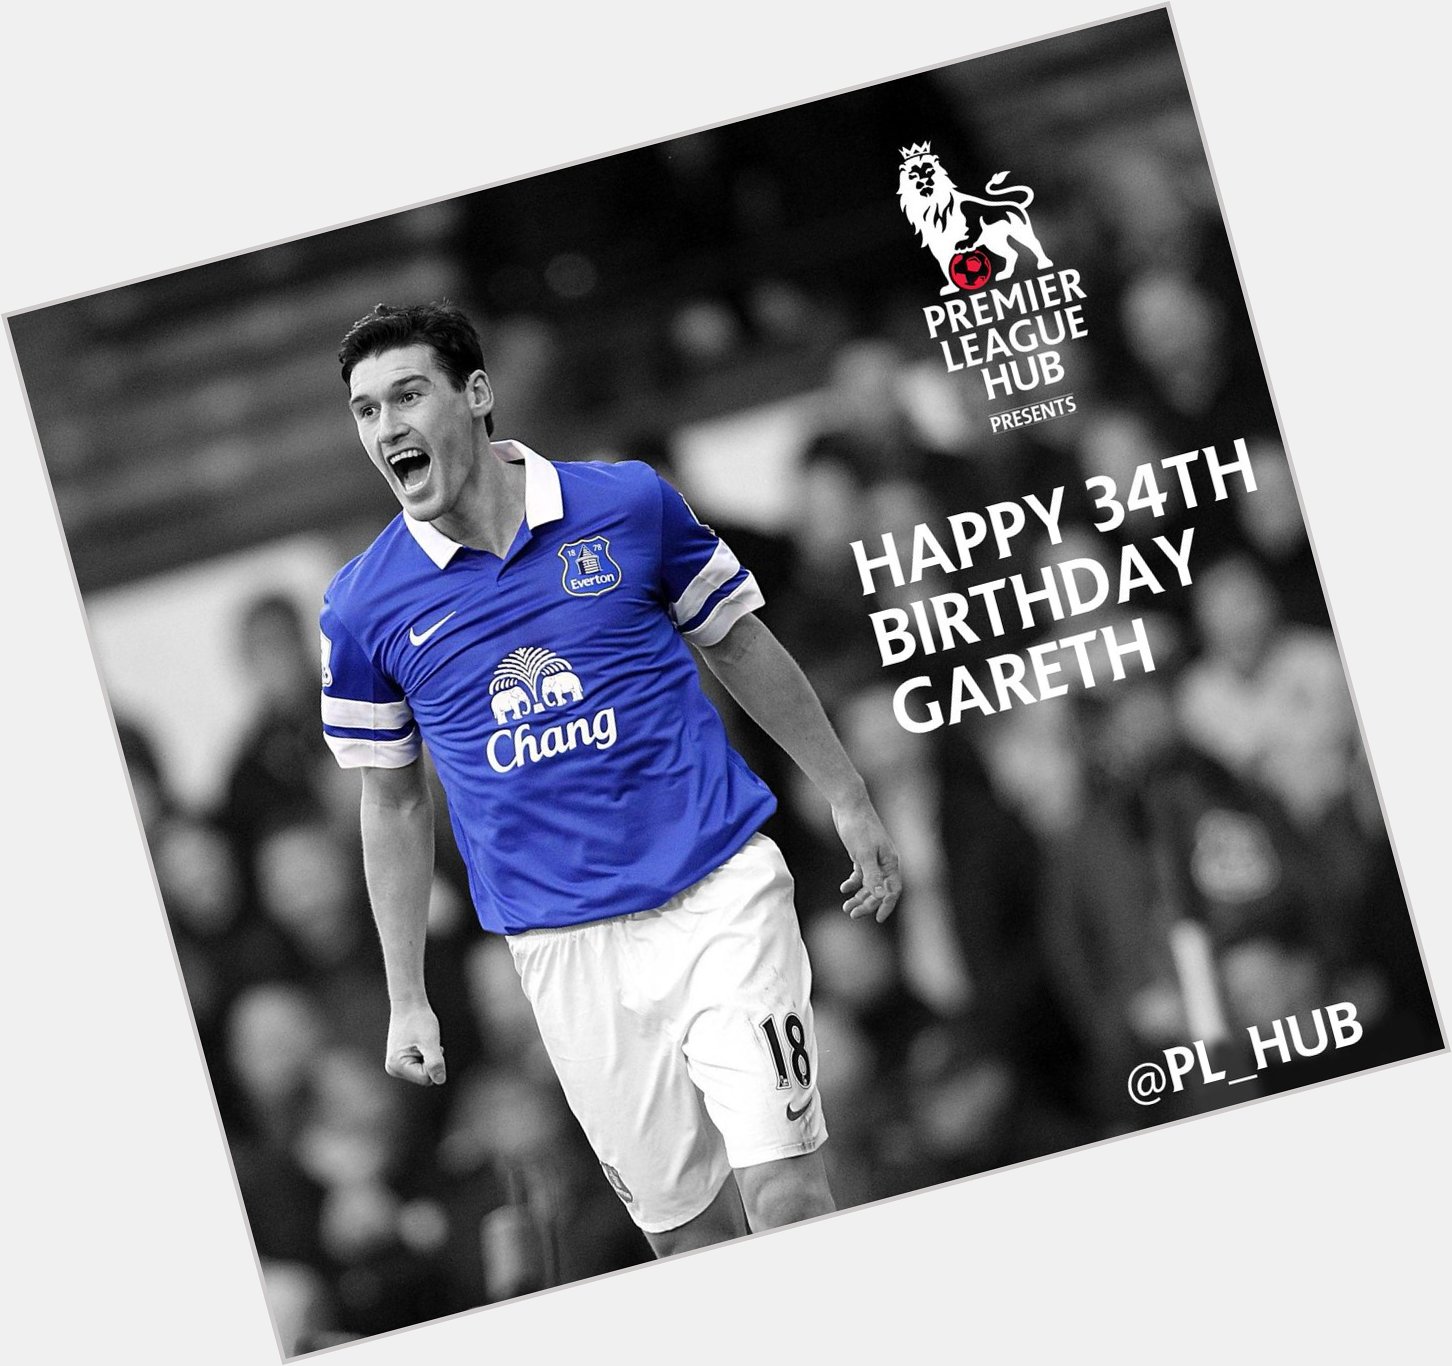 PLH PRESENTS: Happy Belated Birthday Gareth Barry, Hope you had a great day!    